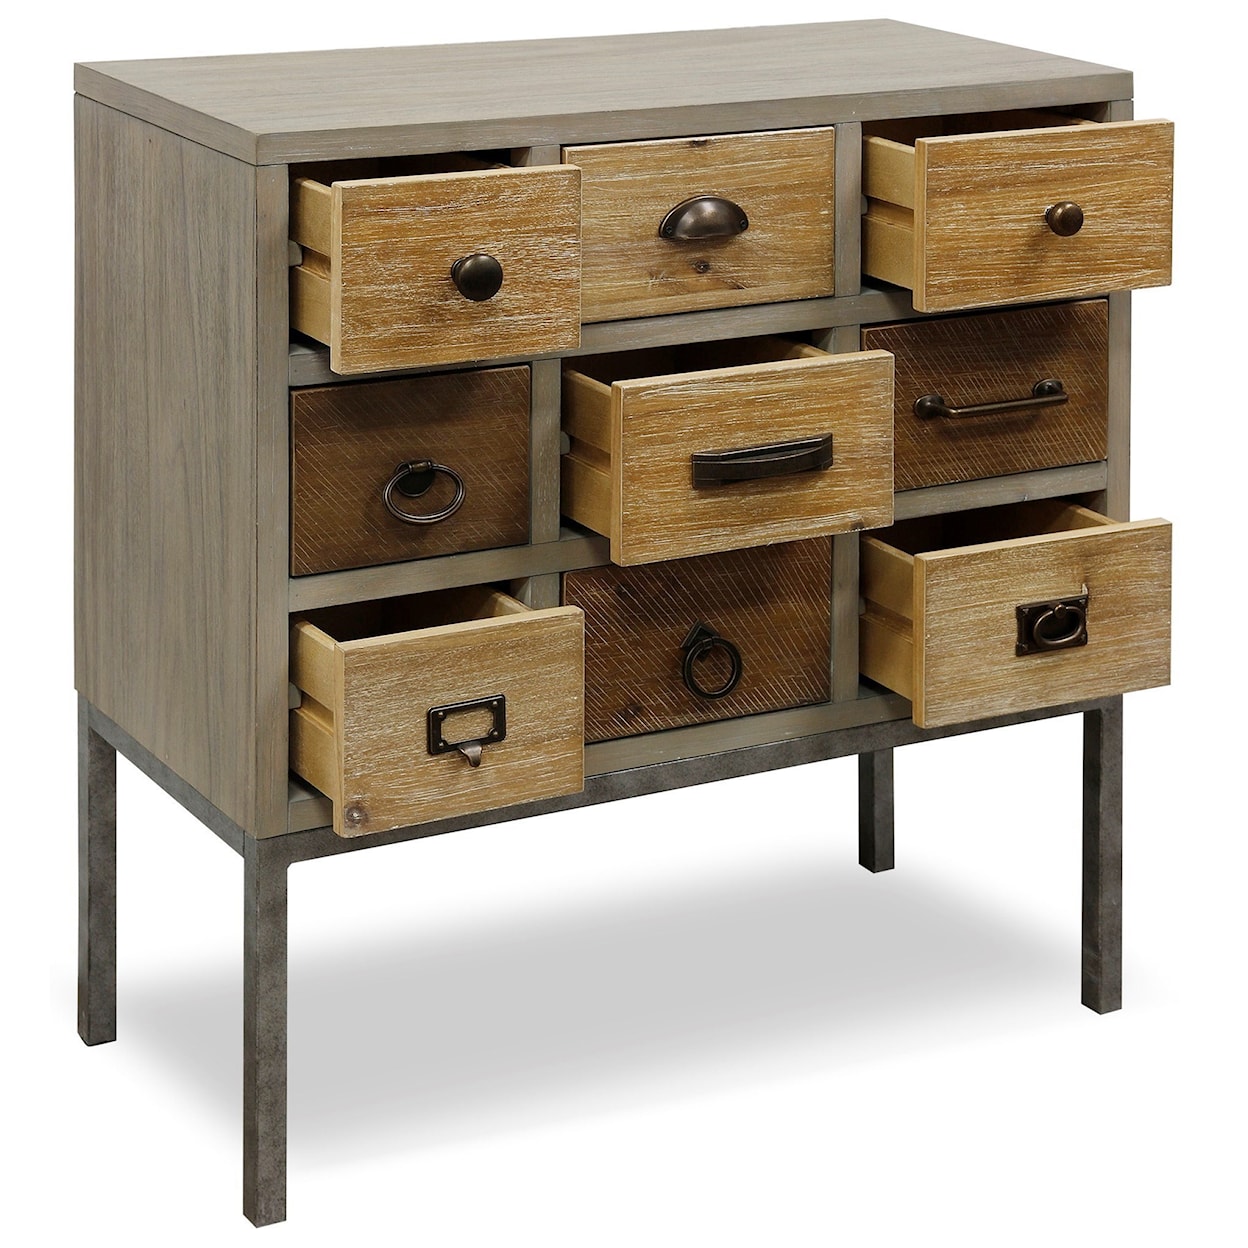 StyleCraft Occasional Cabinets Accent Chest